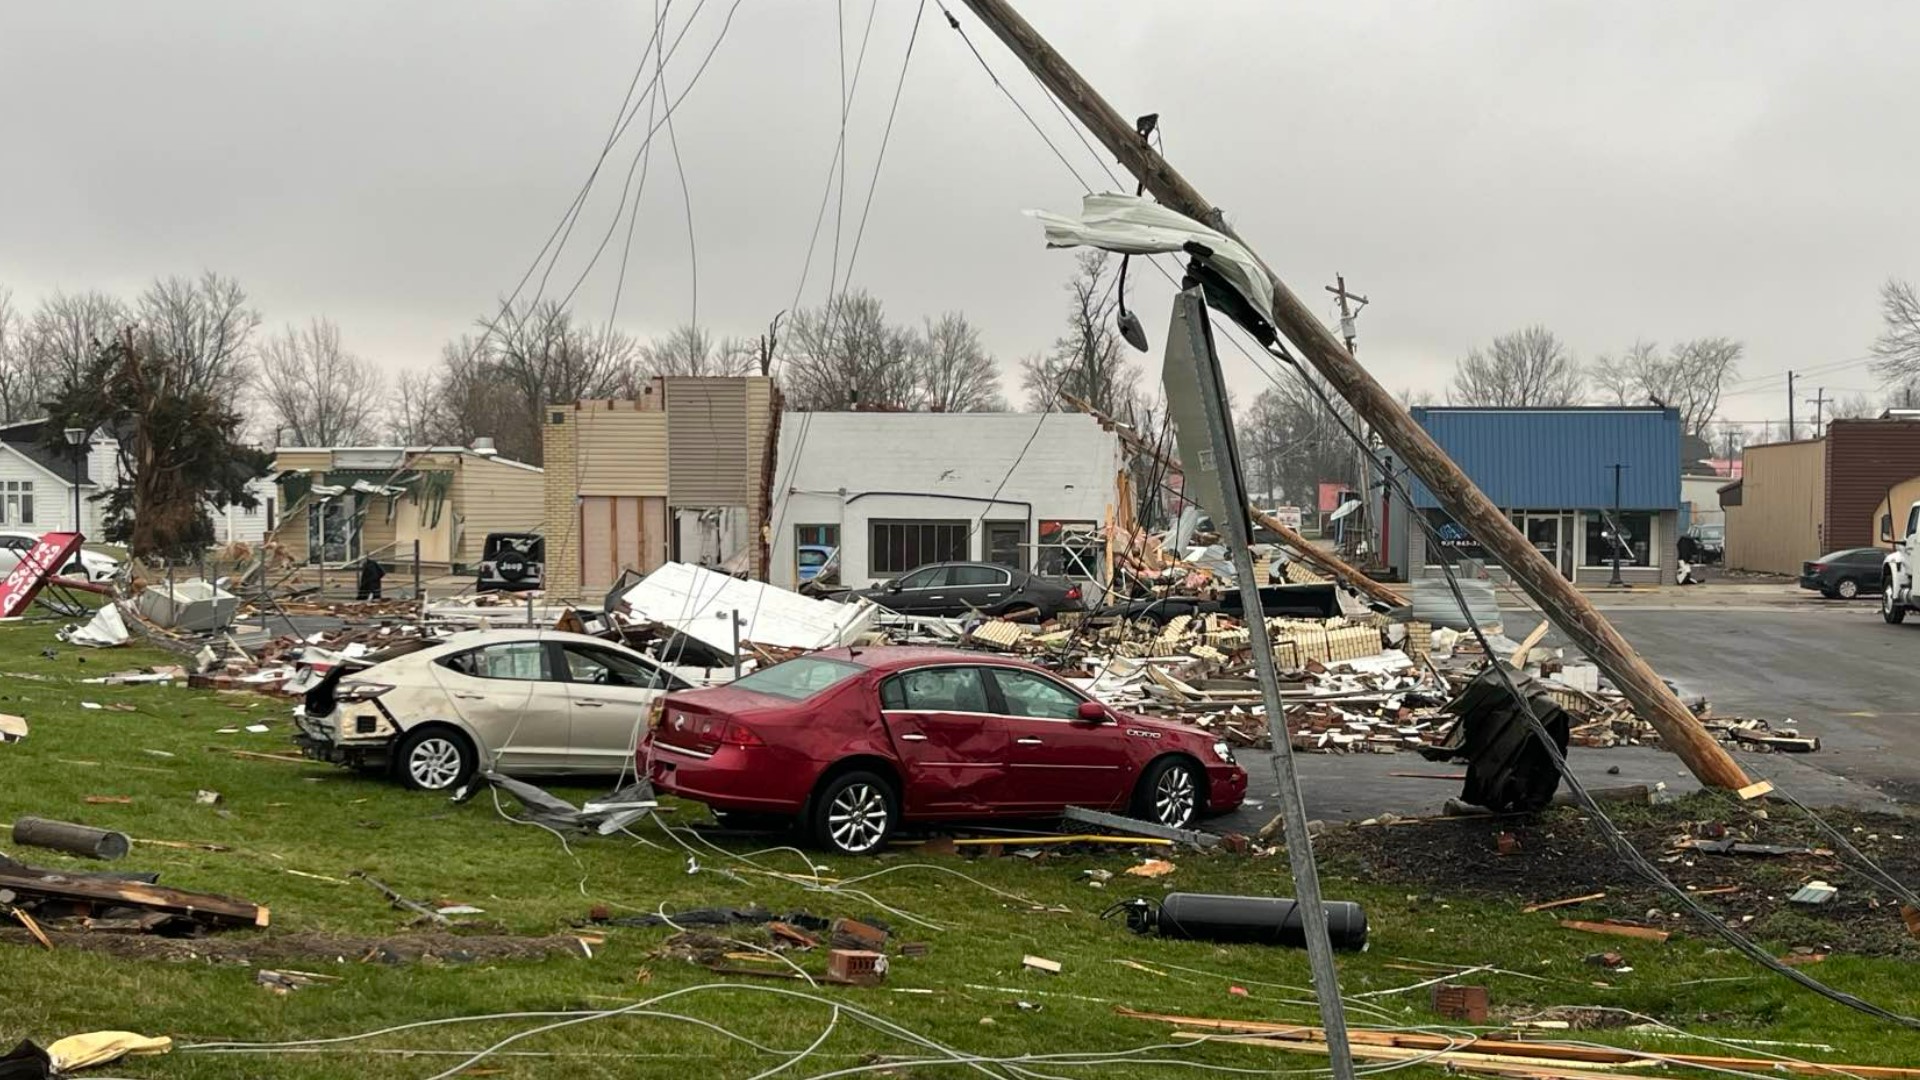 Authorities identified two victims killed as an EF3 tornado ripped through areas of Logan County on Thursday.